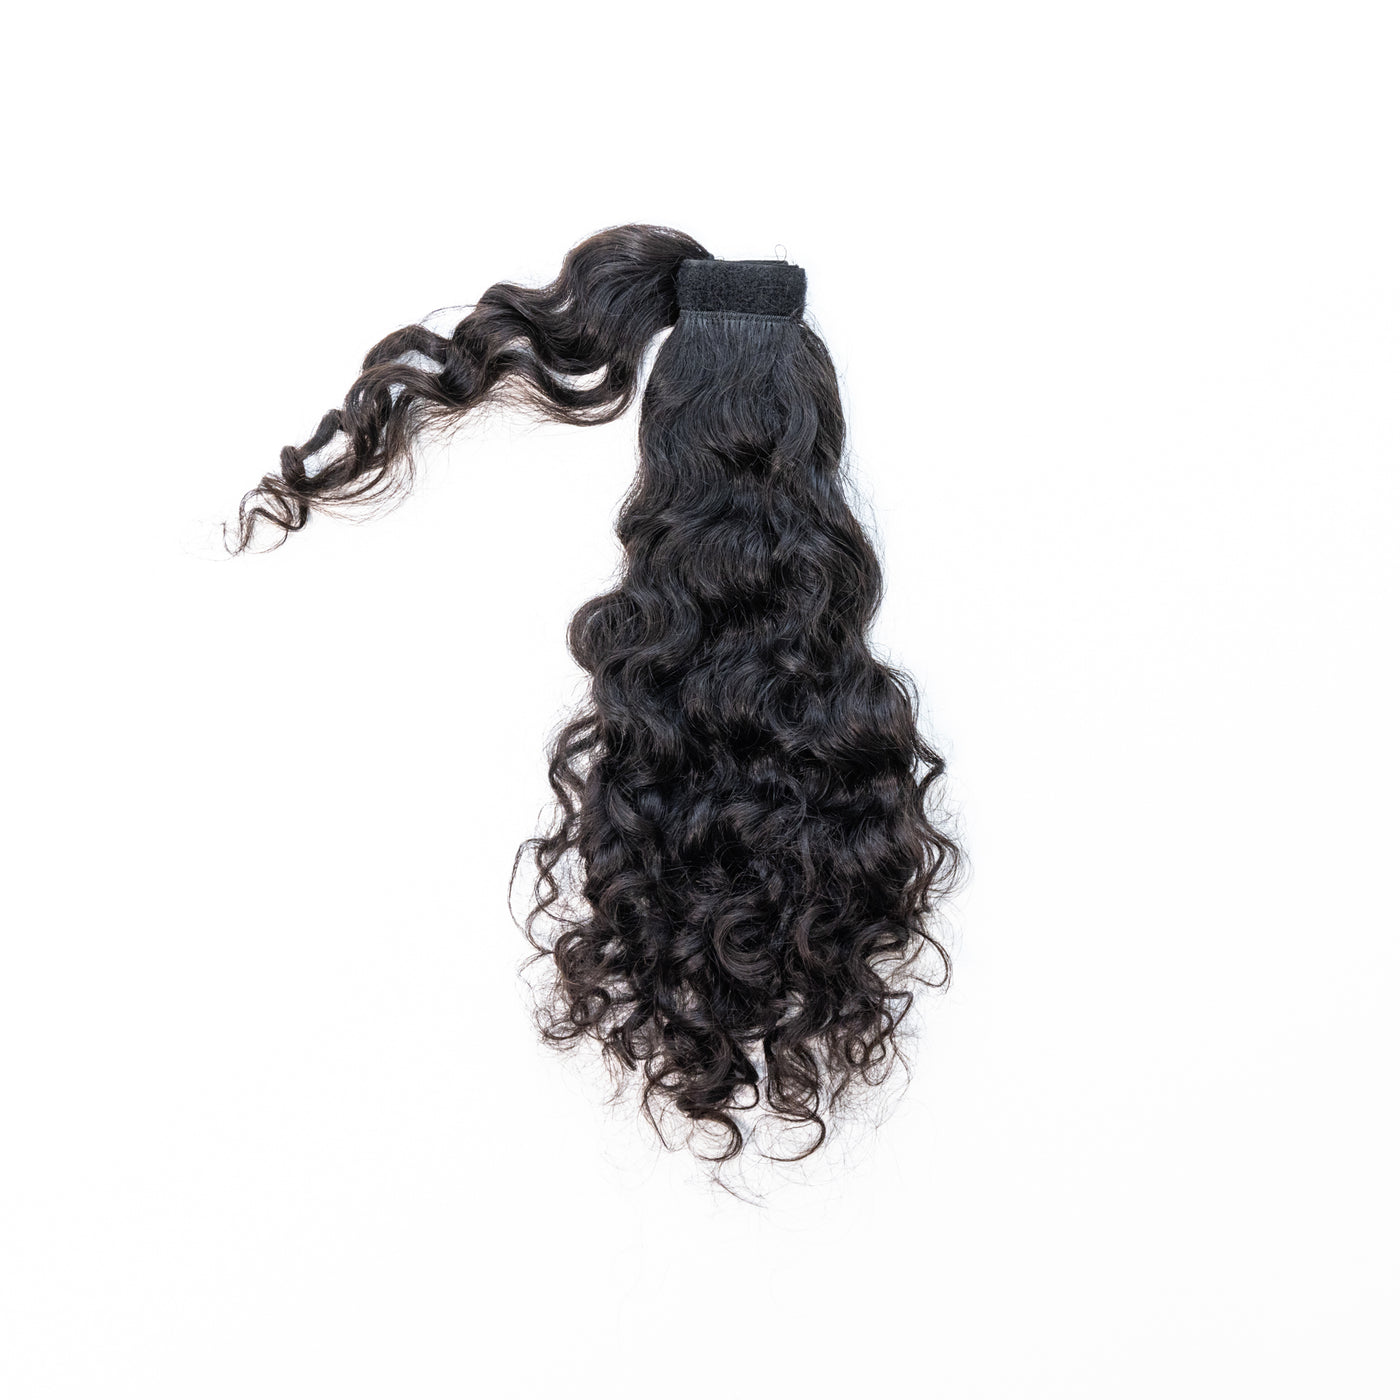 Ponytail Hair Extension - Curly